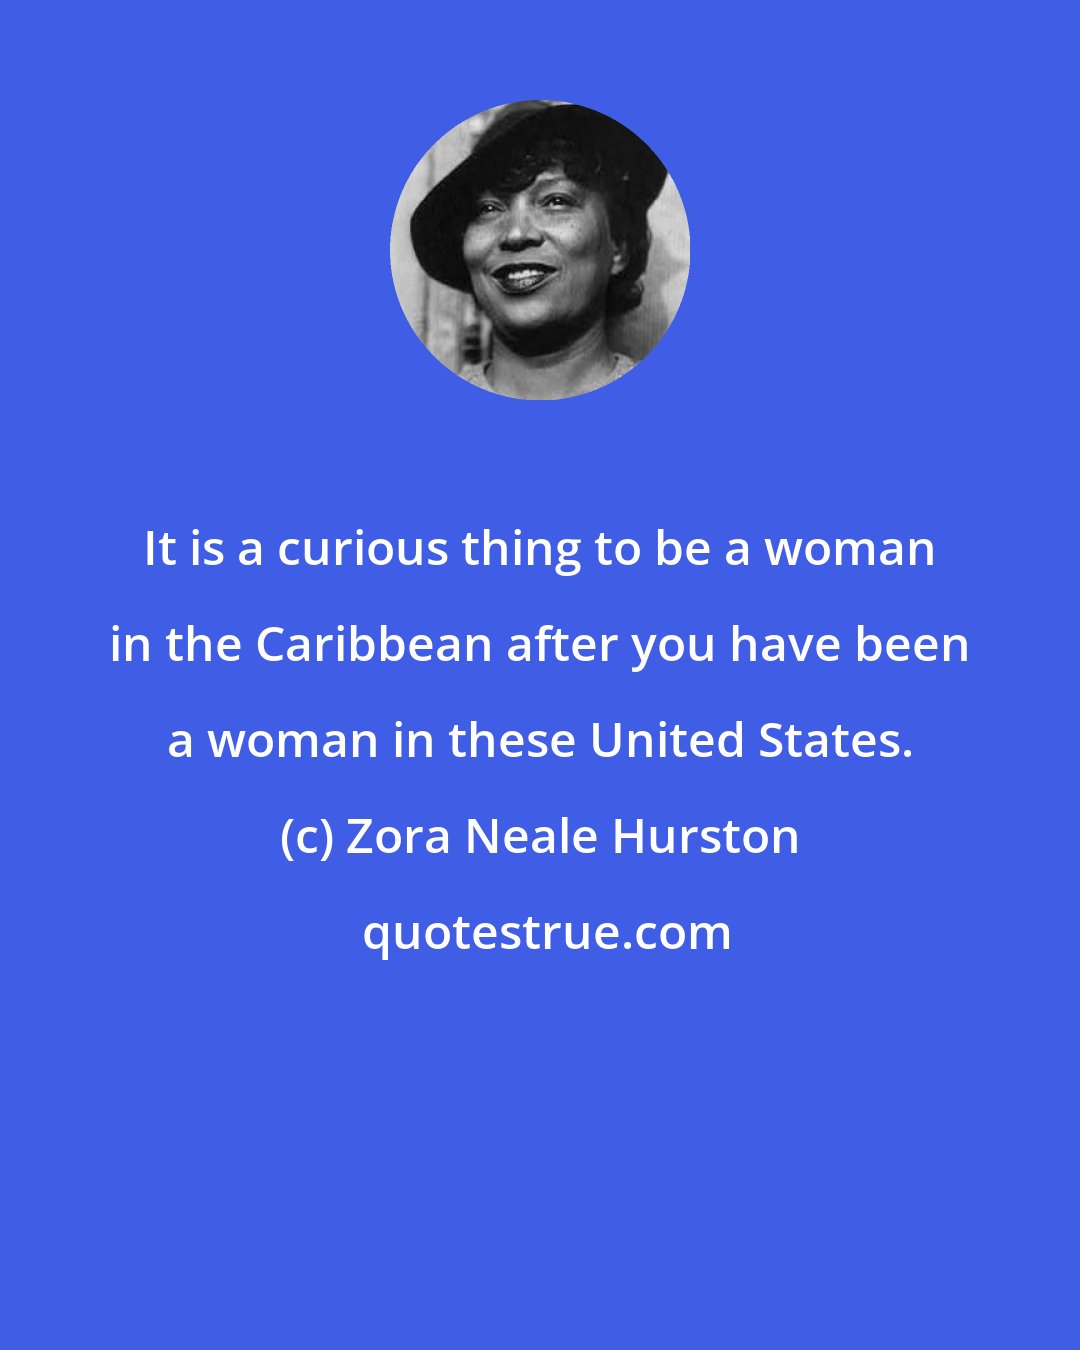 Zora Neale Hurston: It is a curious thing to be a woman in the Caribbean after you have been a woman in these United States.